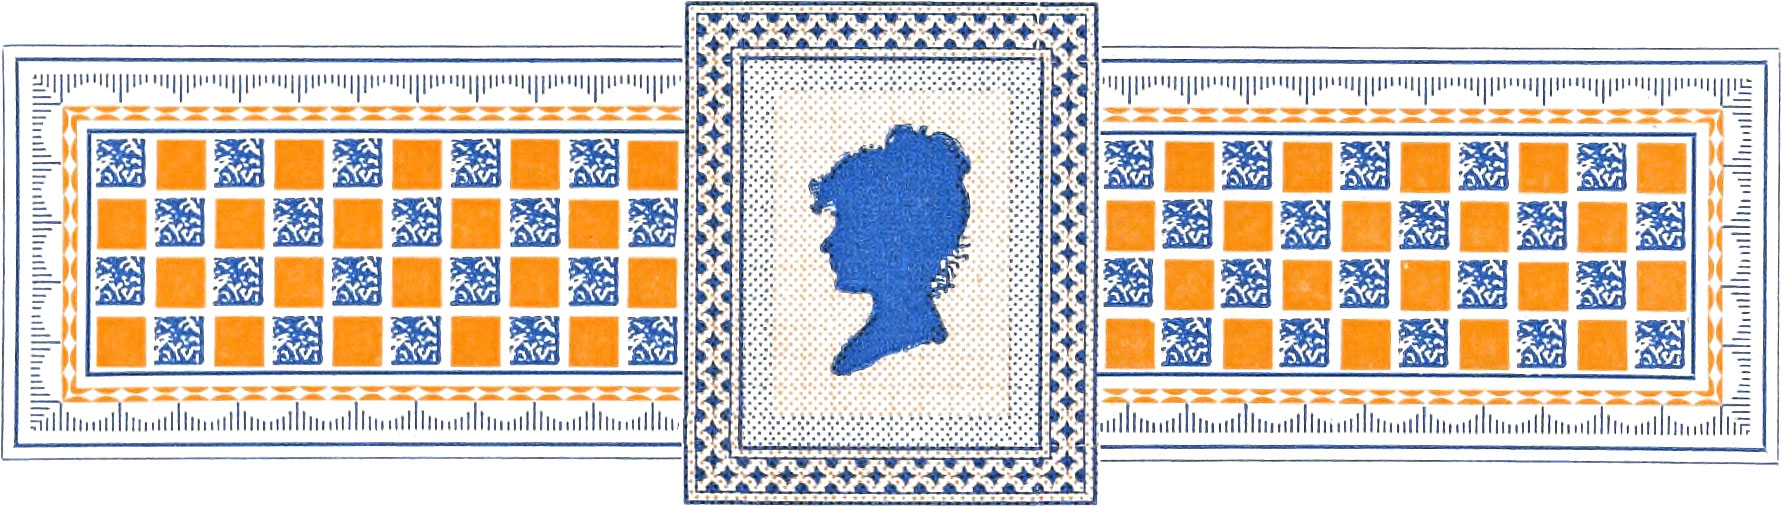 Checkered border with a female silhouette in the middle surrounded by a border comprising blue and orange colors